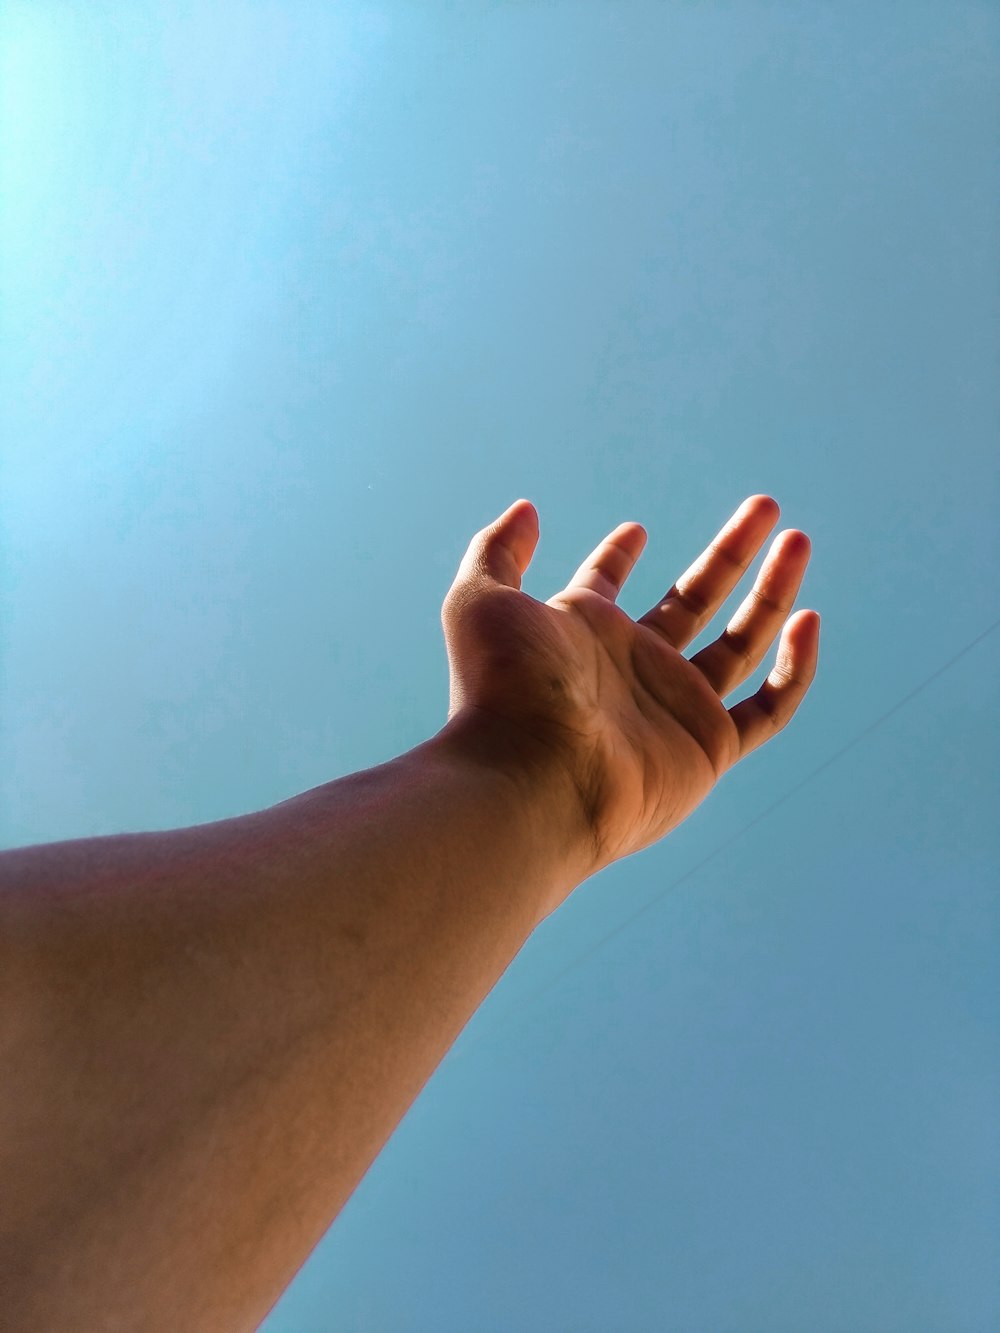 person raising right hand under blue sky during daytime